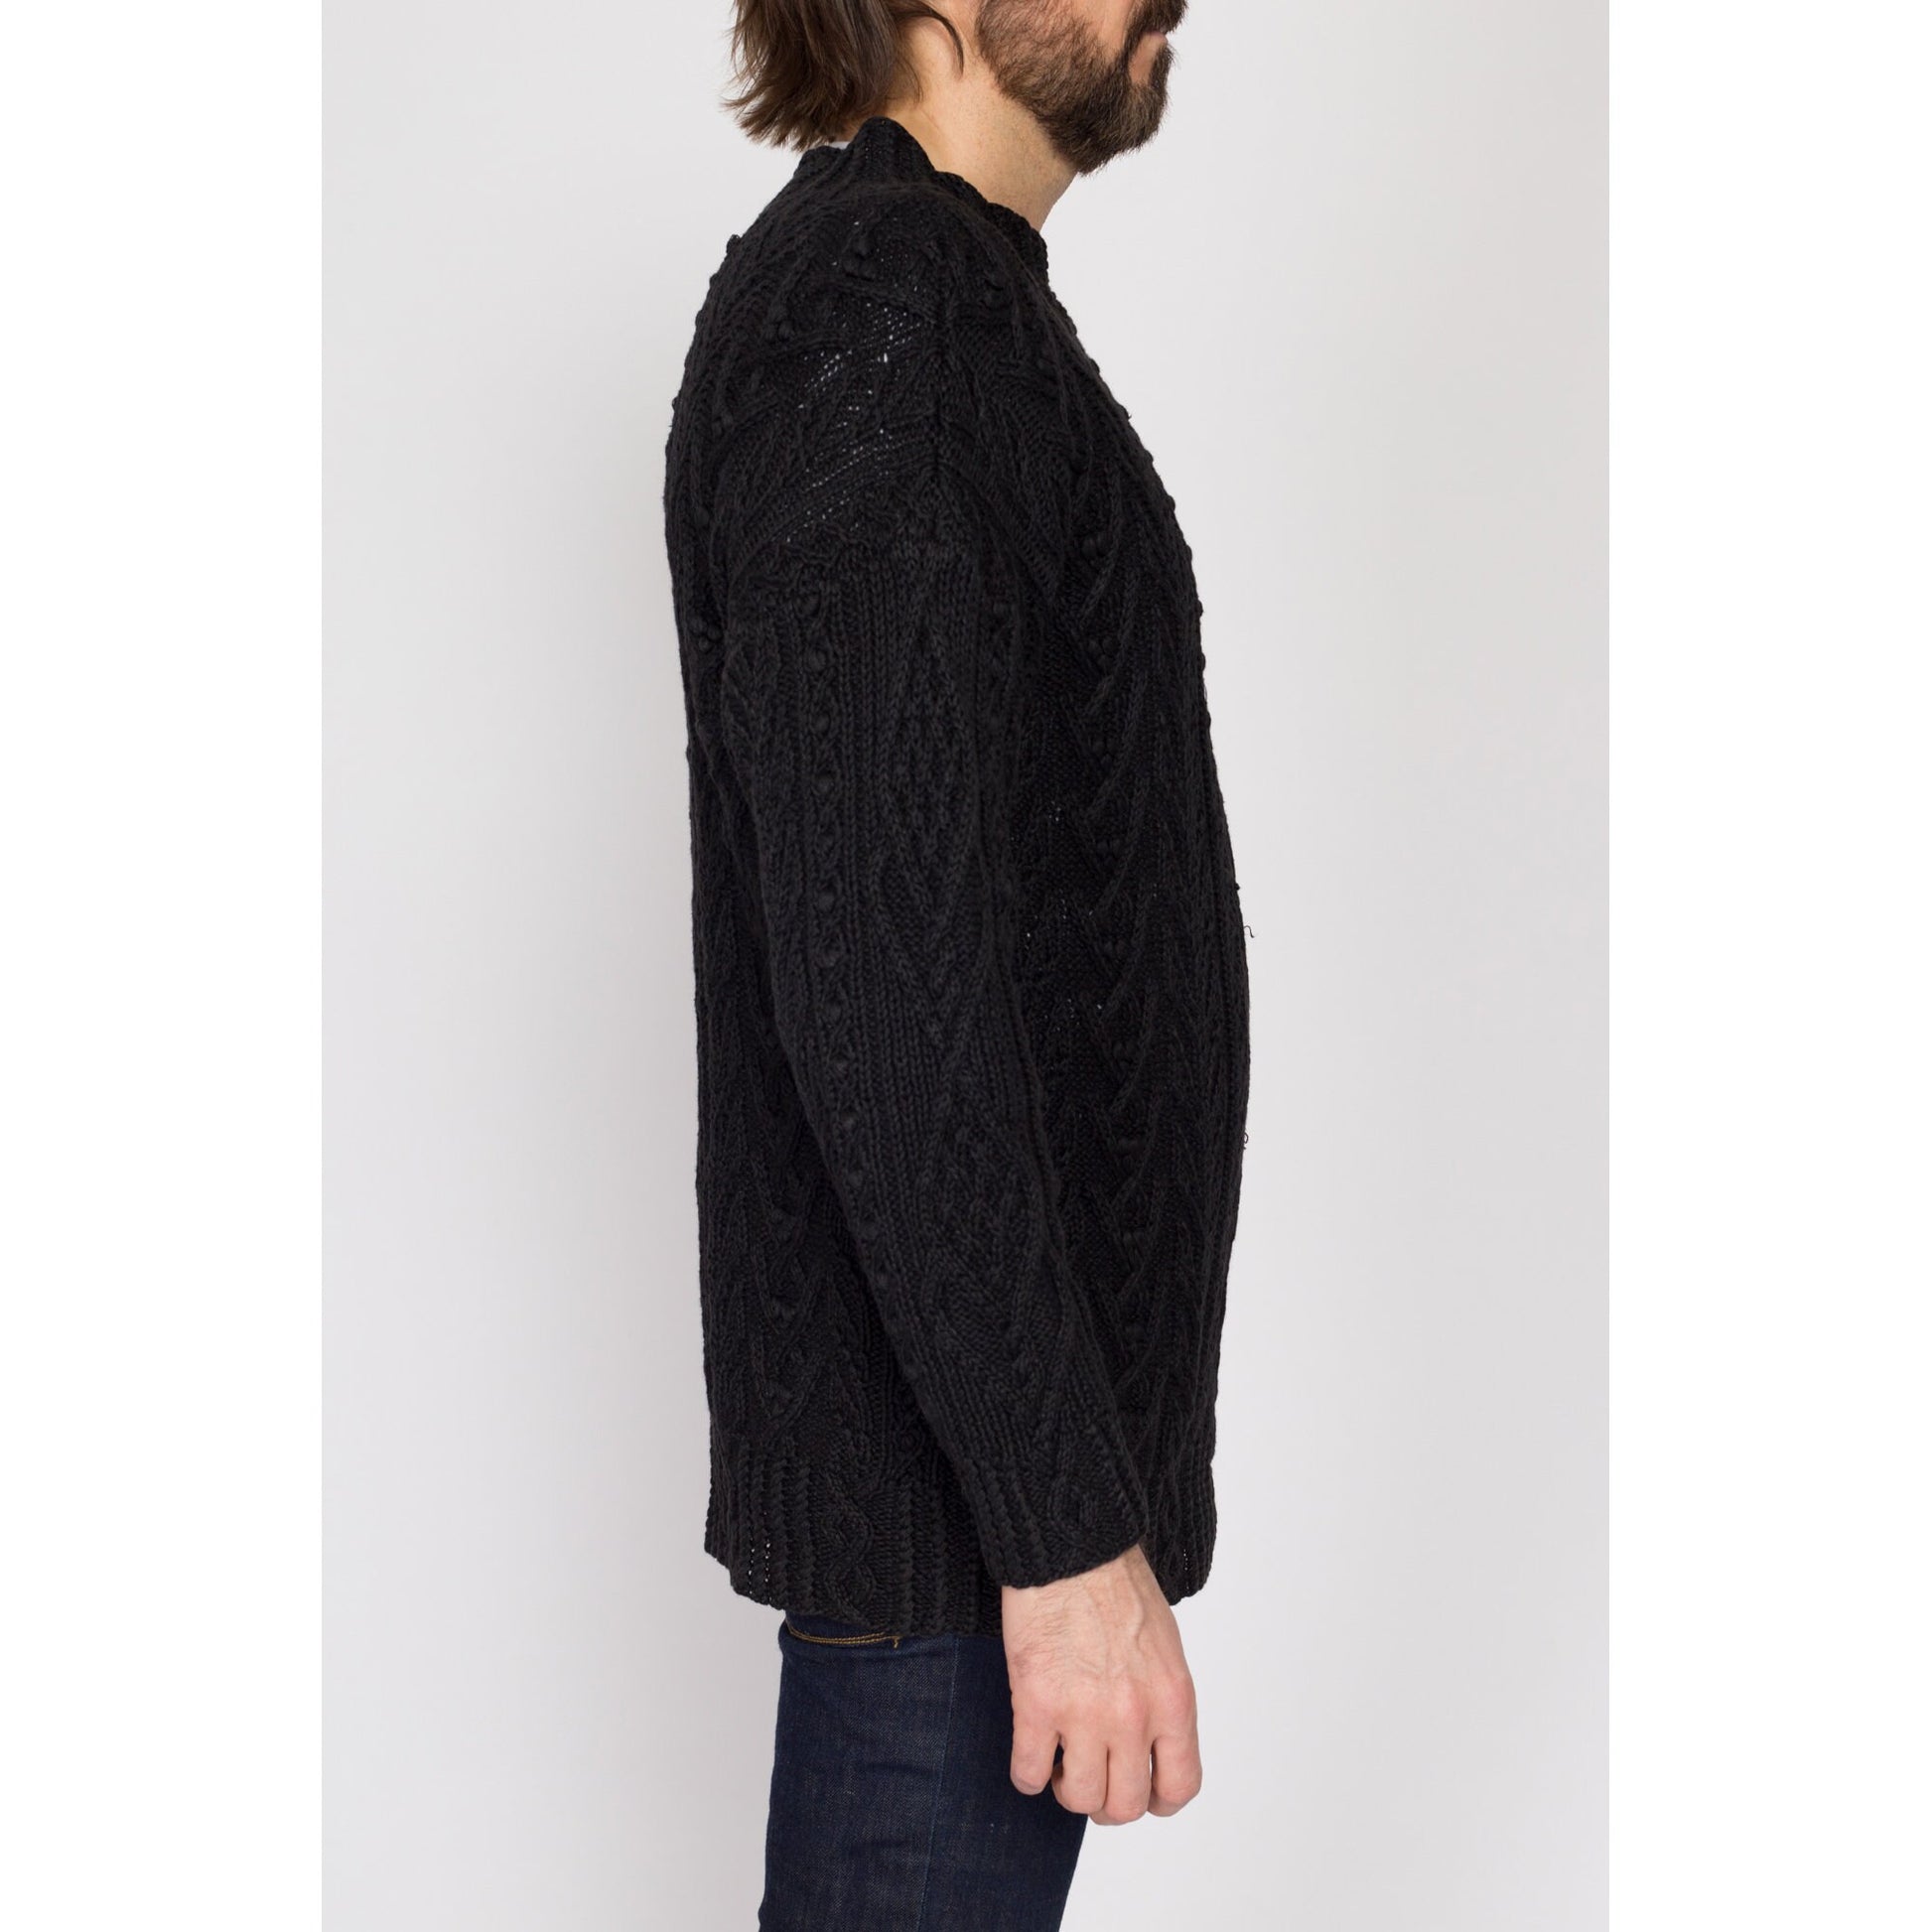 Med-Lrg 90s Express Black Cable Knit Funnel Neck Sweater | Vintage Long Ramie Cotton Handknit Pullover Jumper